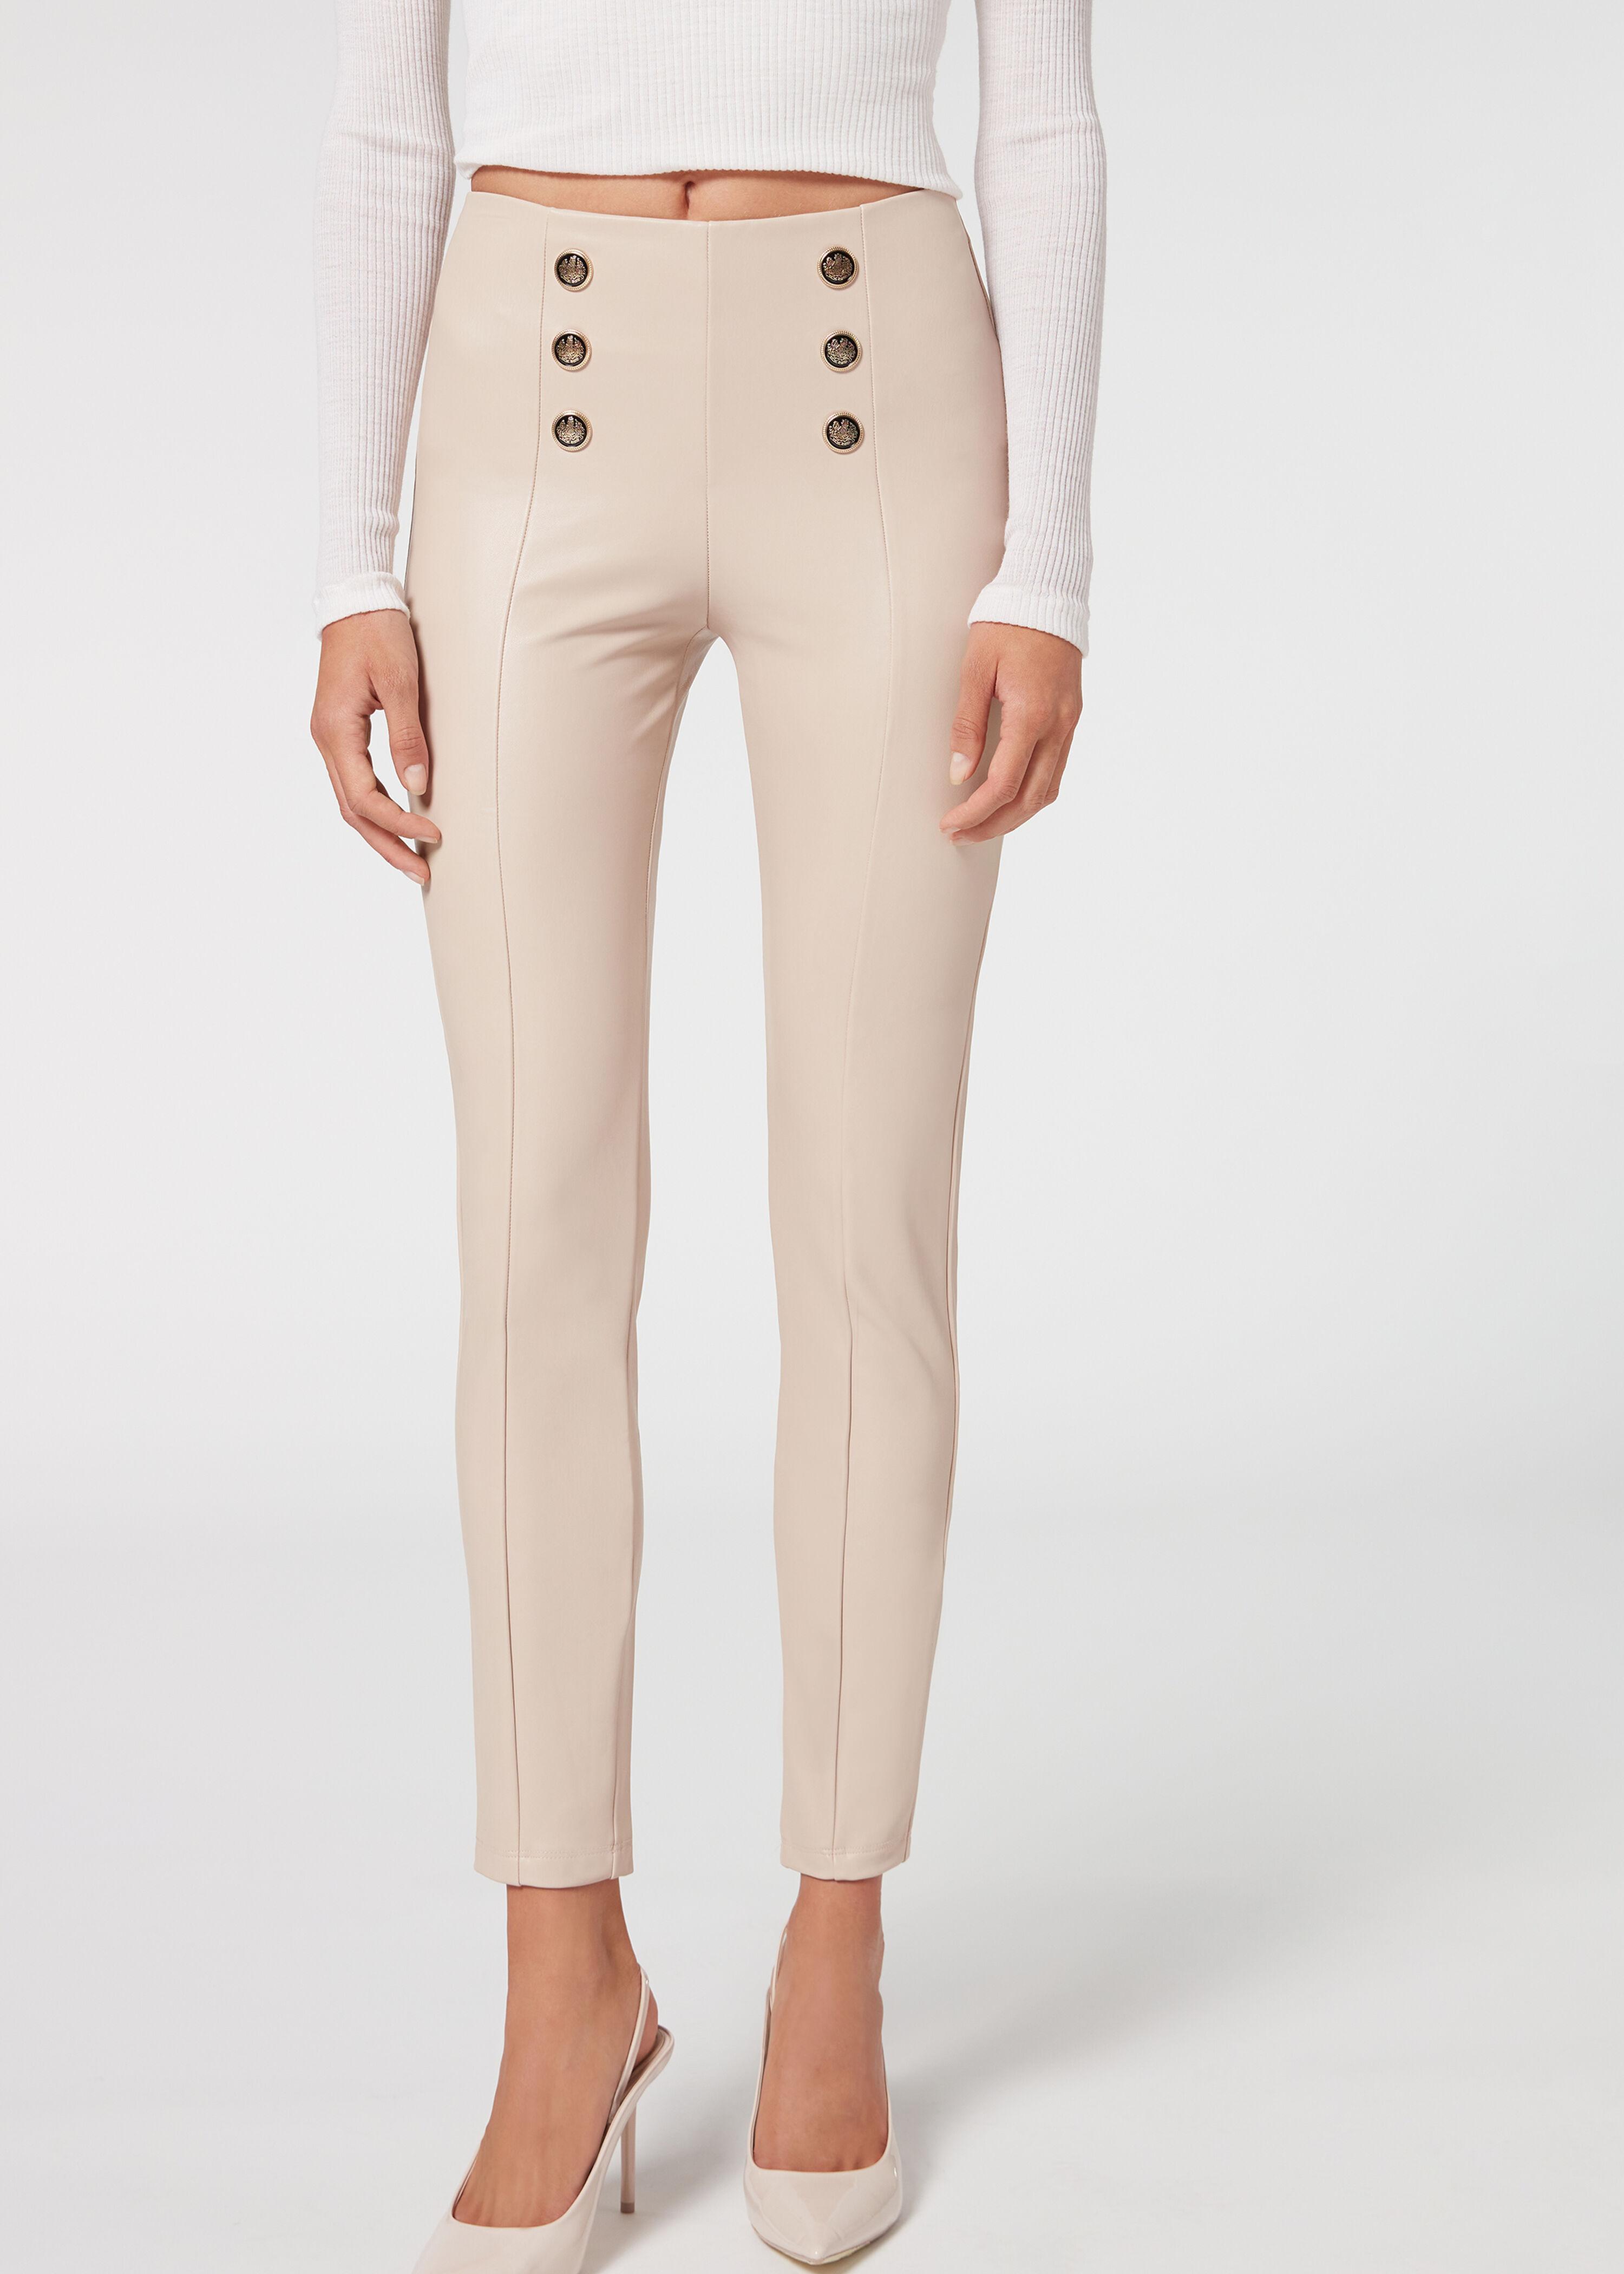 https://cdna.lystit.com/photos/calzedonia/d993ea94/calzedonia-Nude-Skinny-Sailor-Coated-effect-leggings-With-Buttons.jpeg